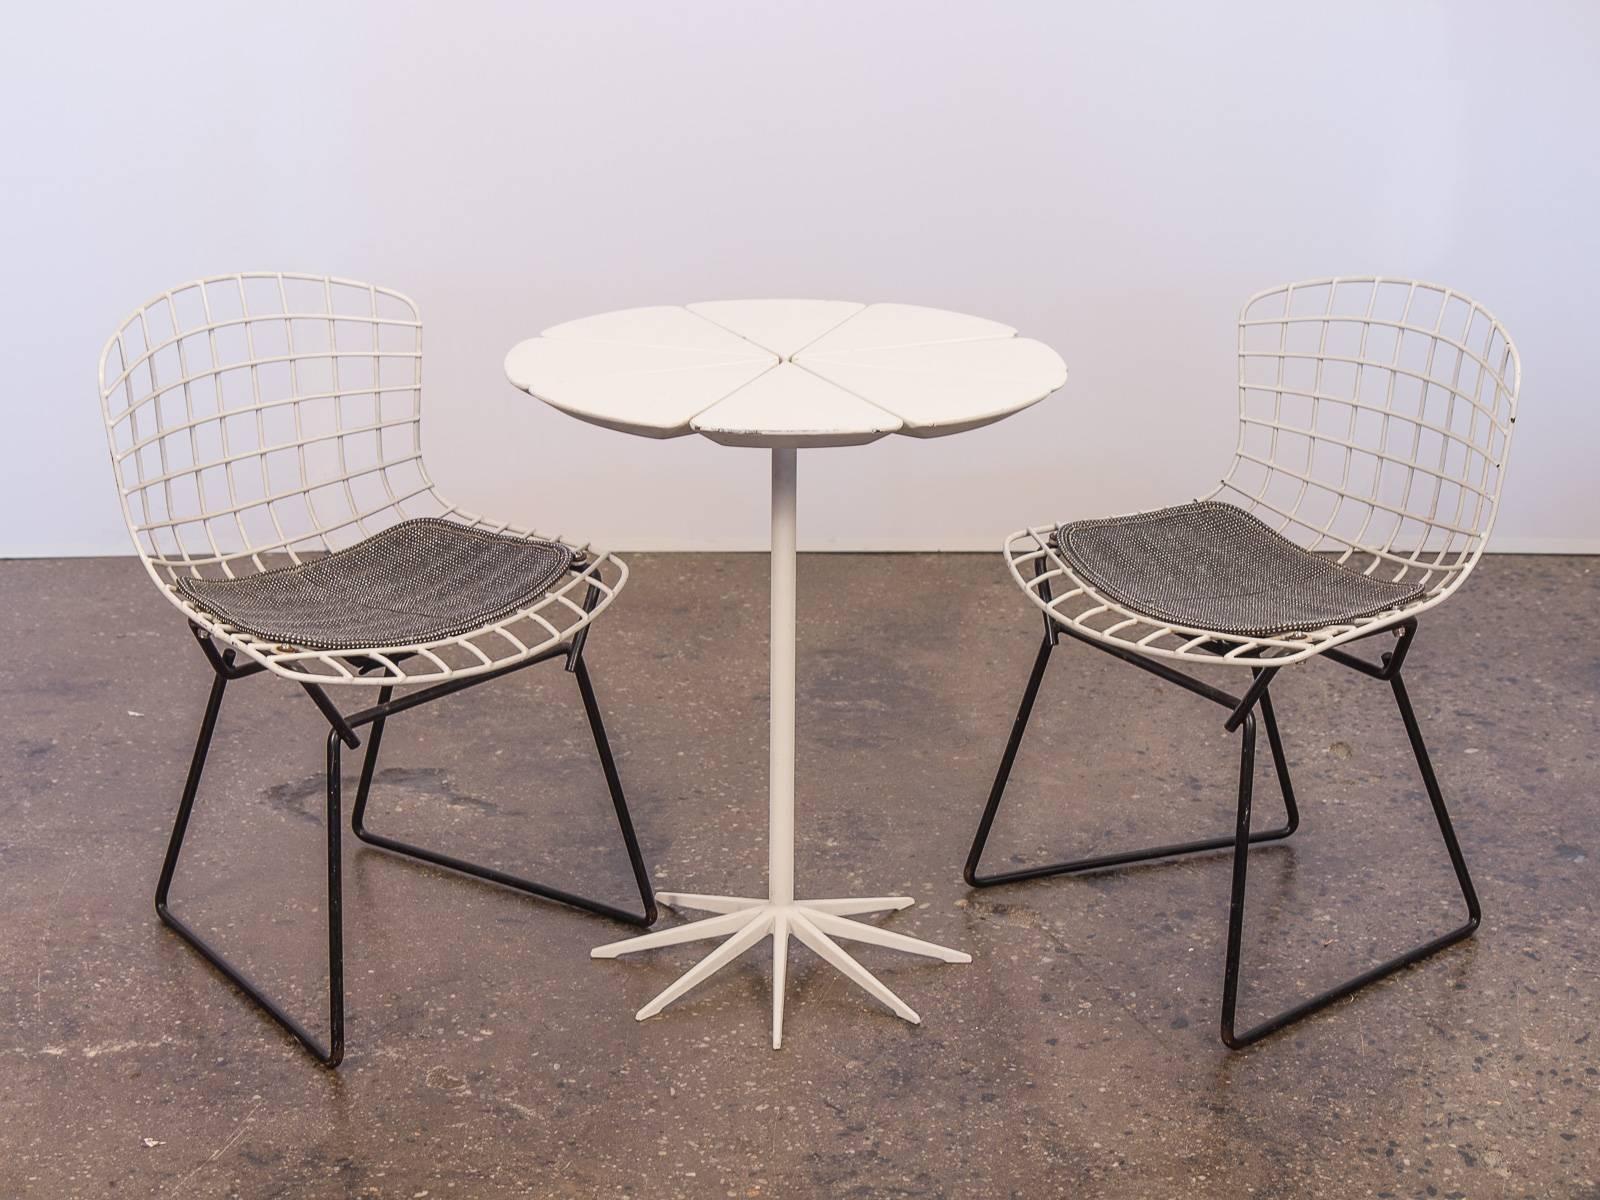 Original vintage petal end table by Richard Schultz for Knoll. This lovely end table adorns eight individual “petals” inspired by Queen Anne’s Lace. Each segment is supported by its own branch, which stems from the original aluminium base. White